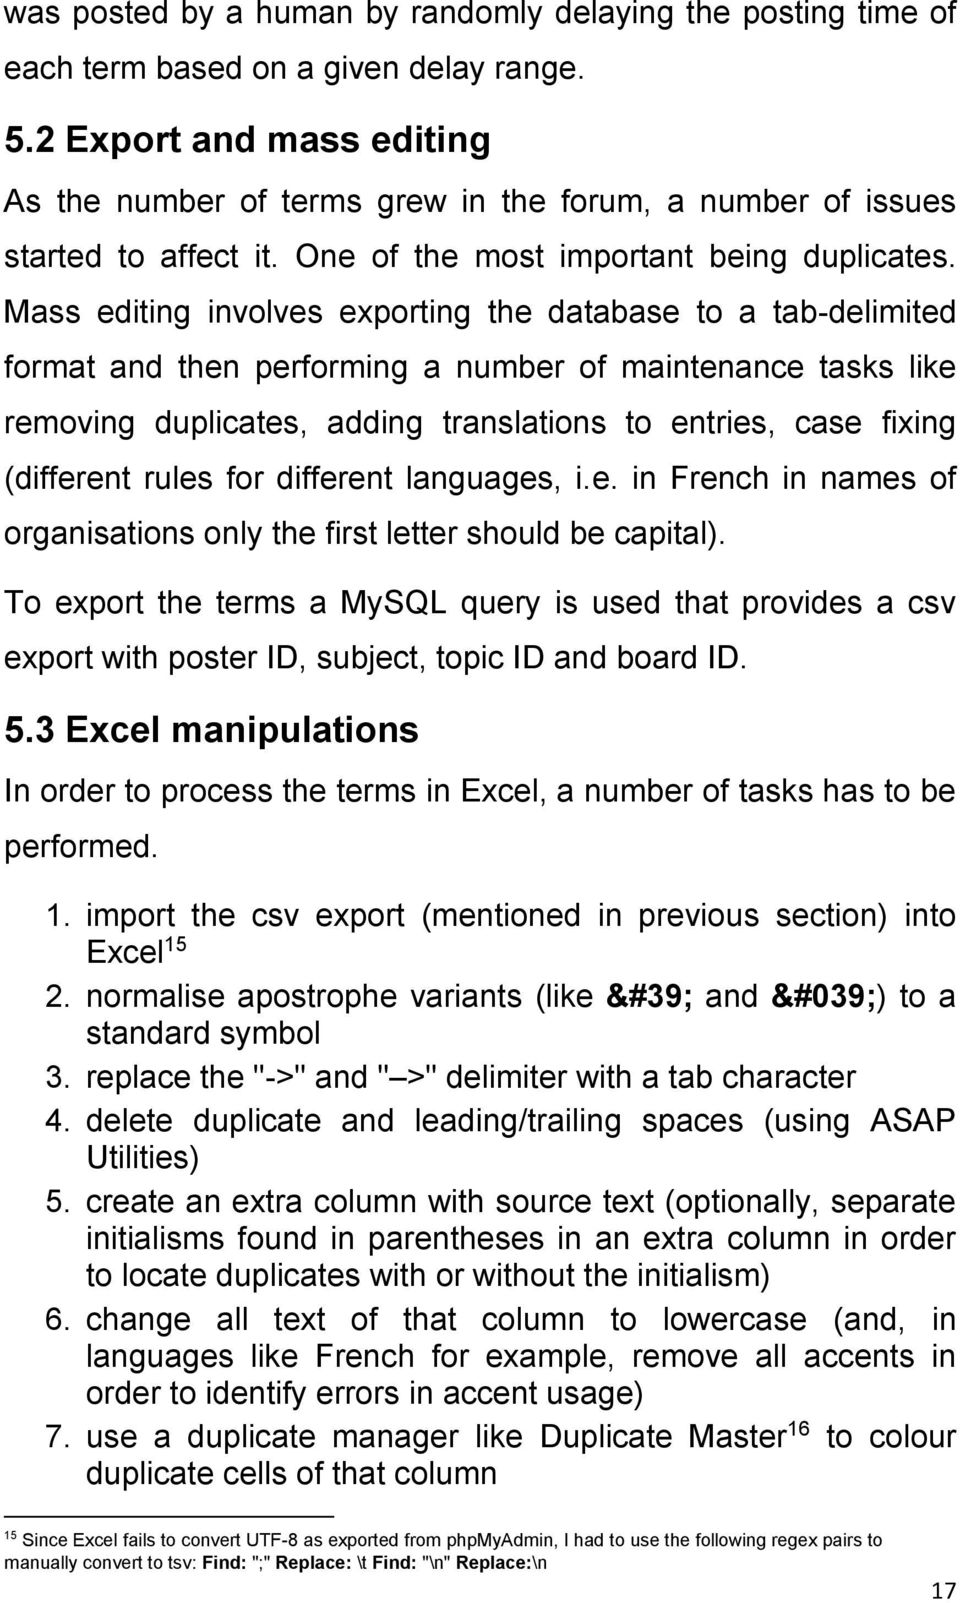 Mass editing involves exporting the database to a tab-delimited format and then performing a number of maintenance tasks like removing duplicates, adding translations to entries, case fixing